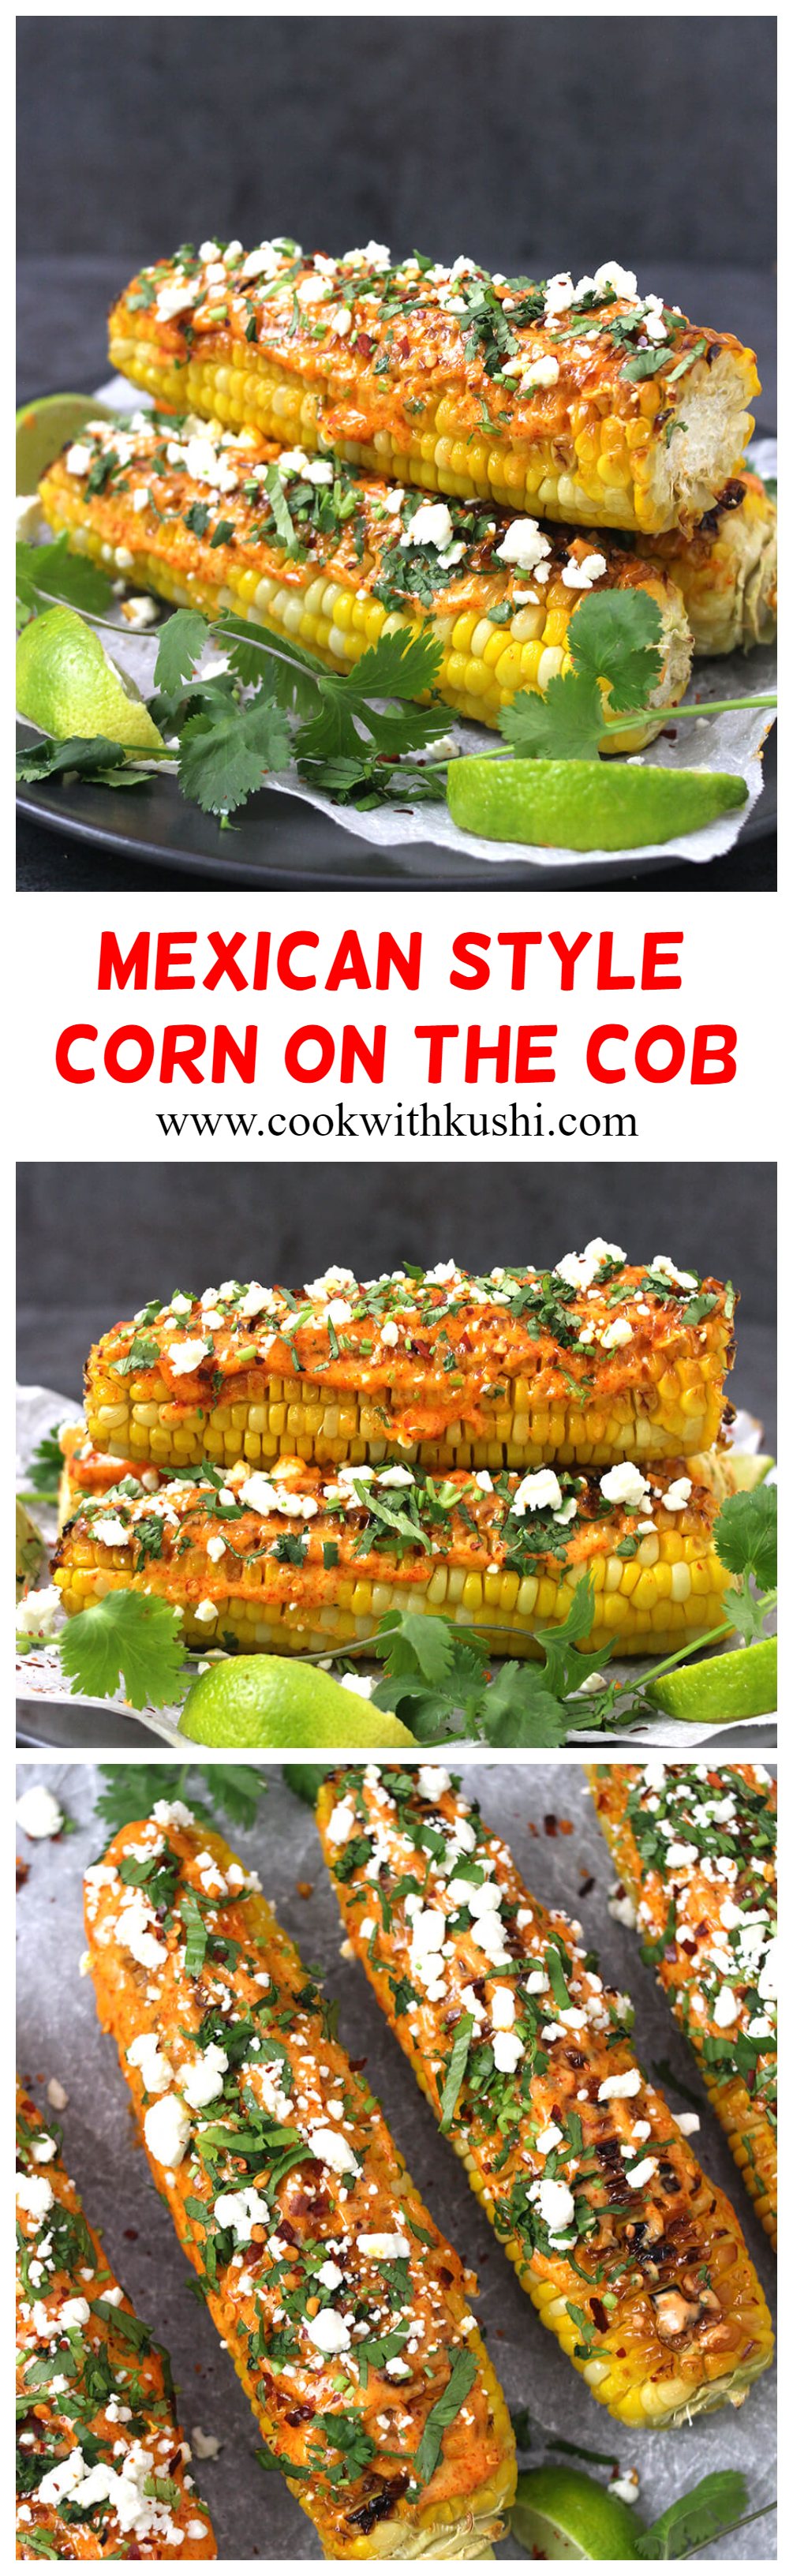 Mexican Corn on the Cob (Elote) is an easy to make, flavorful street snack with the most delicious topping ever. This is the best and classic way to serve corn on the cob! #mexicanrecipes #mexicanfood #cornonthecob #cincodemayo #streetcorn #grillrecipes #summerrecipes #bhuttarecipes #indianstreetfood #holidayrecipes #kidsfriendly #glutenfree #easyrecipes #quickrecipes #healthysnacks #kidssnacks 